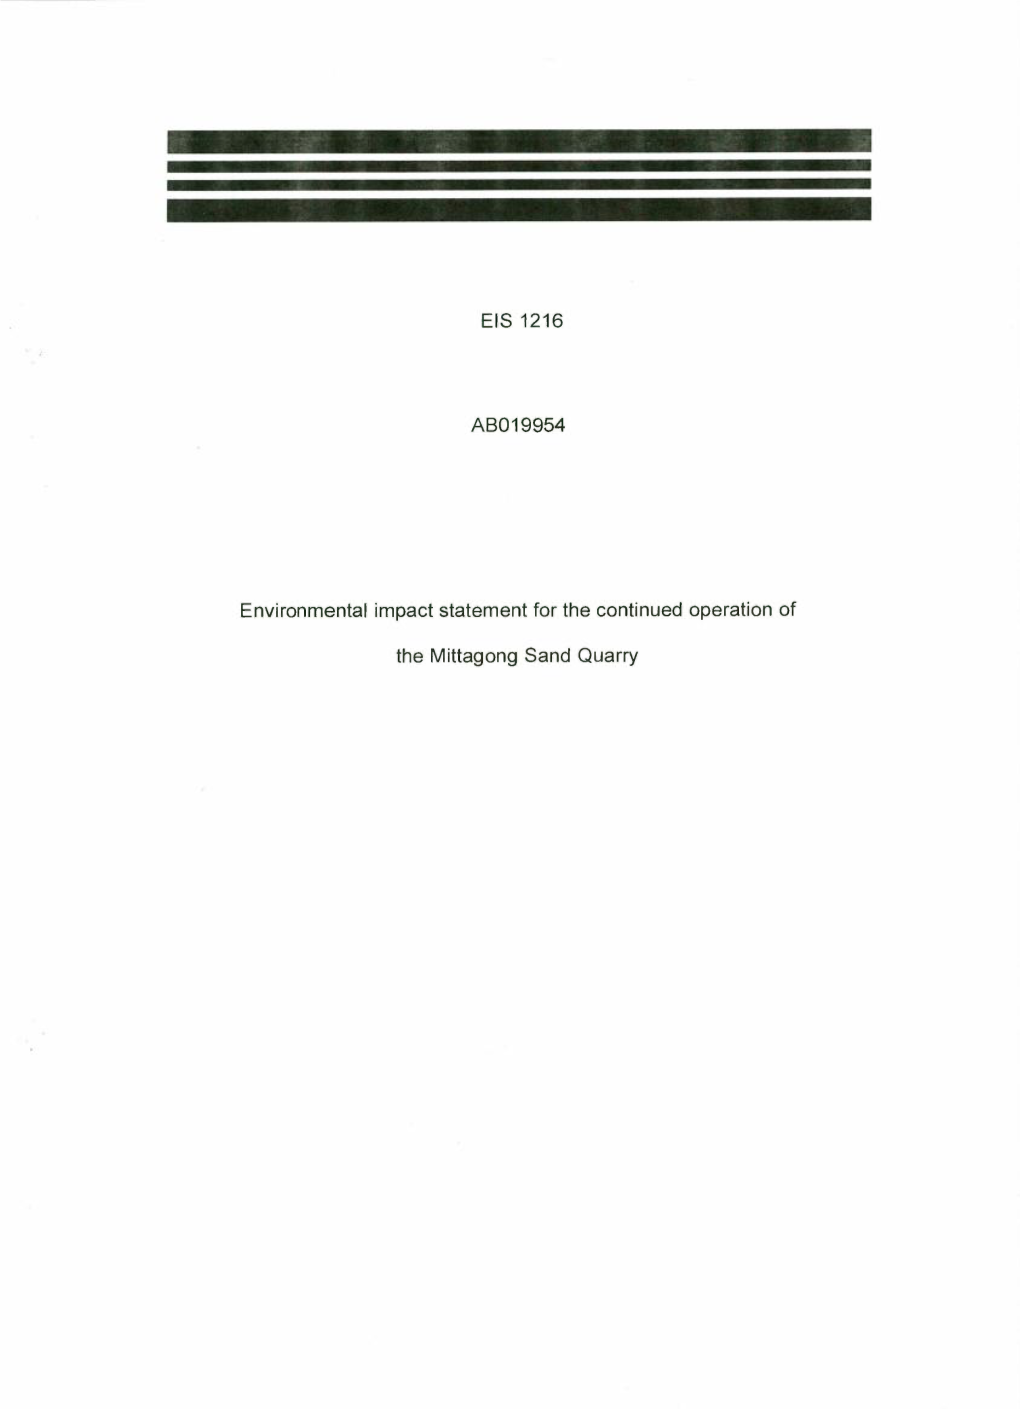 EIS 1216 Environmental Impact Statement for the Continued Operation of the Mittagong Sand Quarry